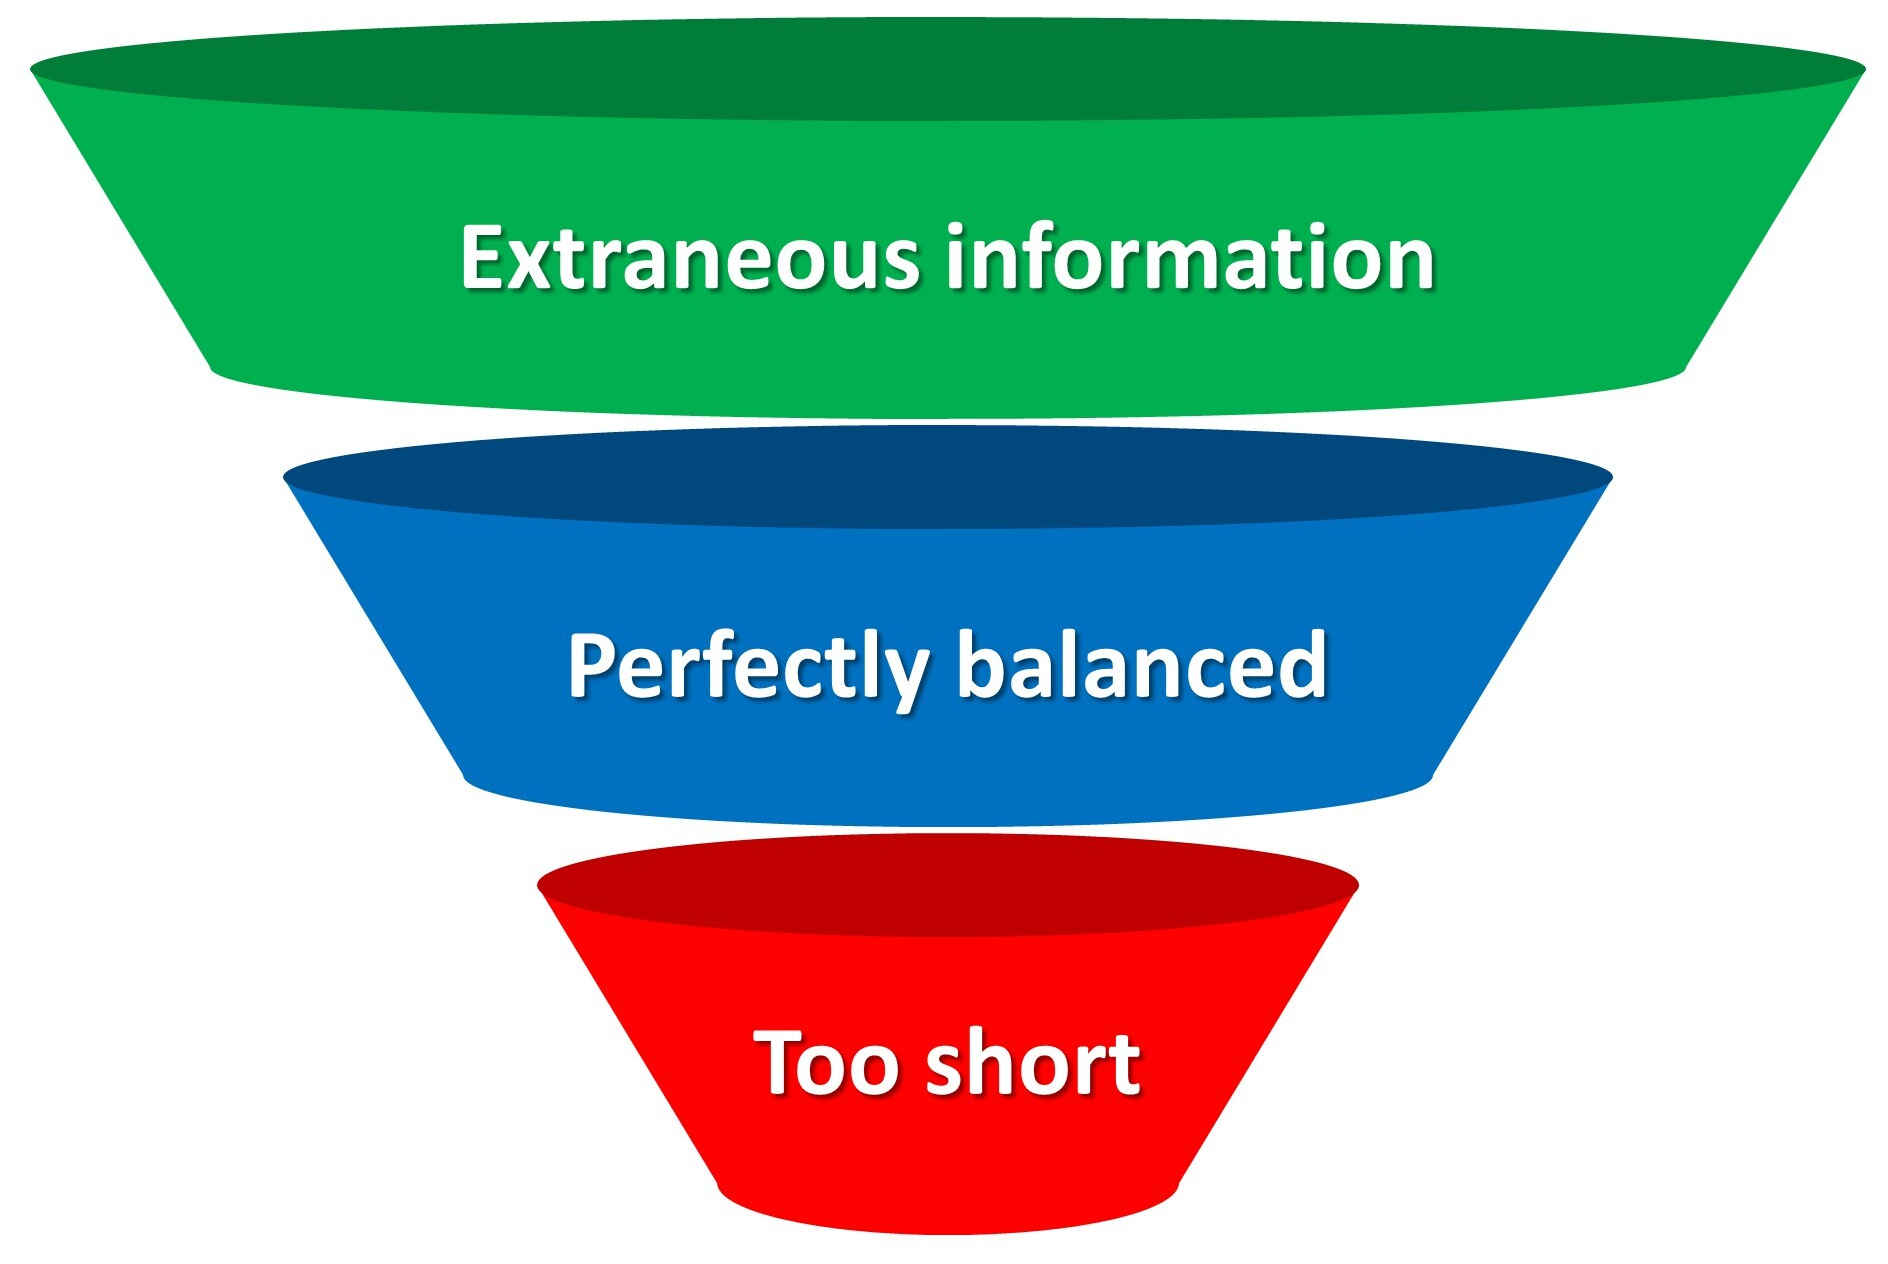 Funnel with three sections: Extraneous Information at the top, Perfectly Balanced in the center, and Too Short at the bottom